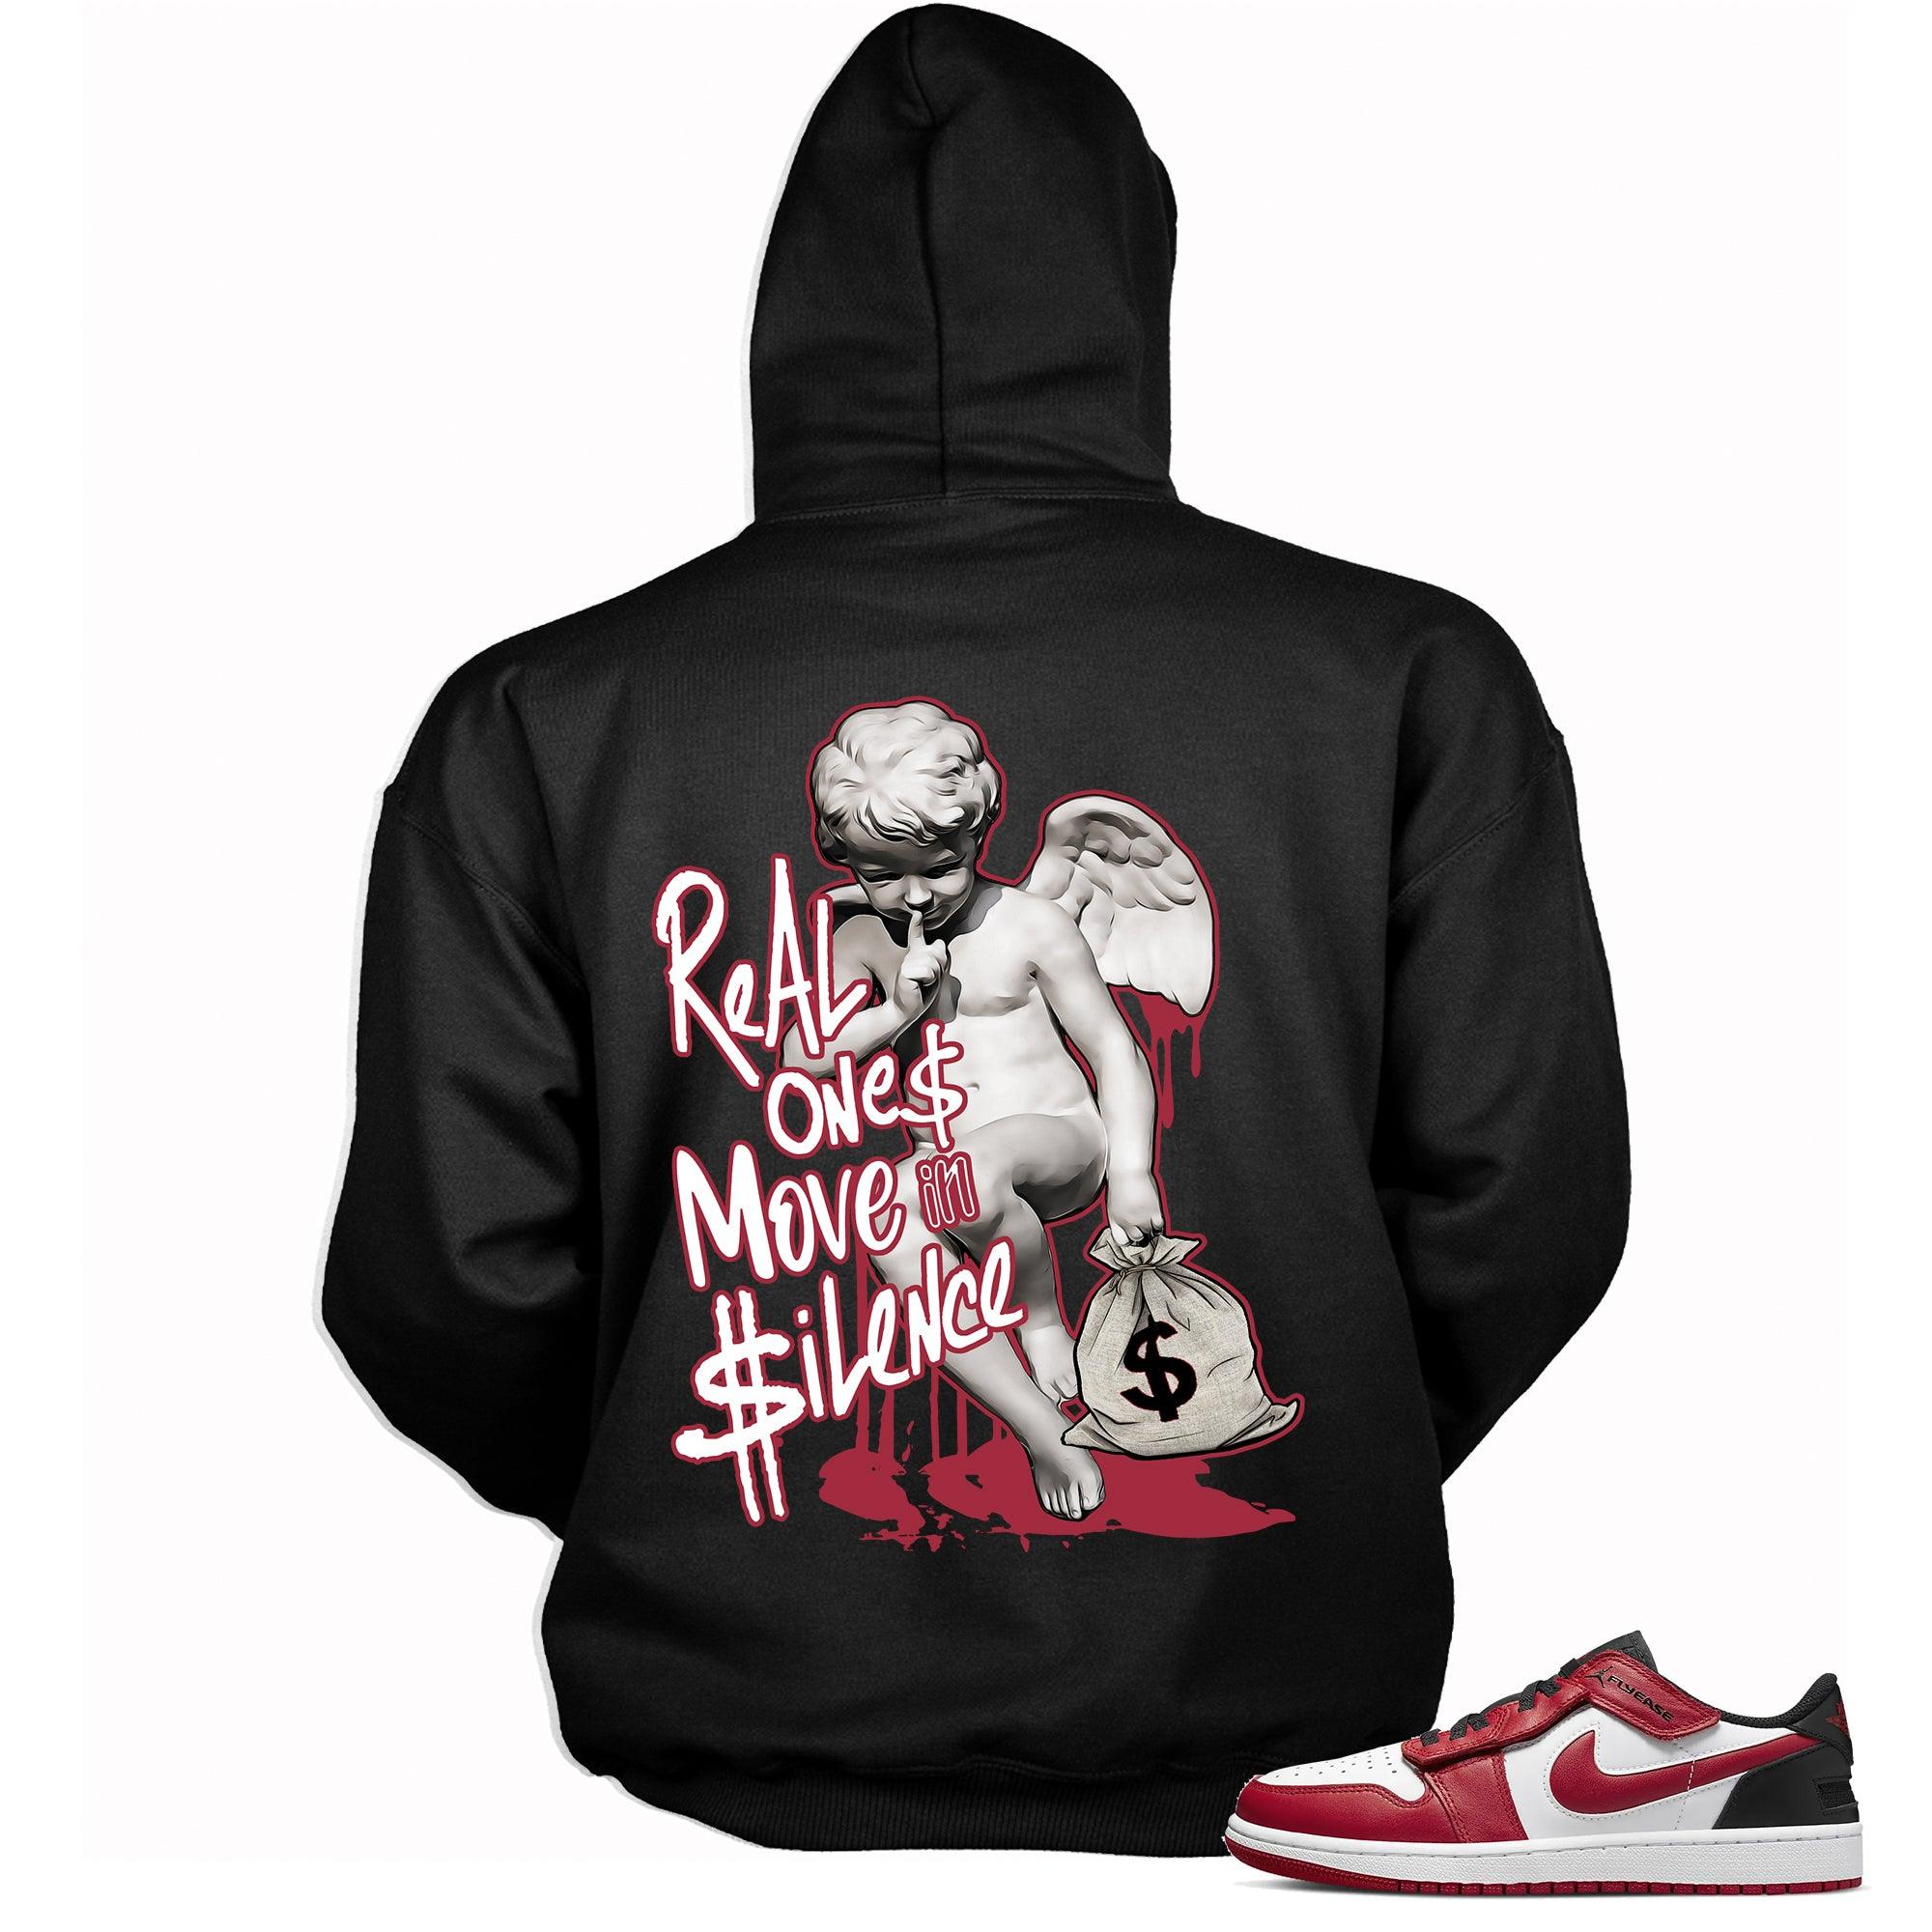 Real Ones Move in Silence Hoodie Jordan 1s Low Fly Ease photo